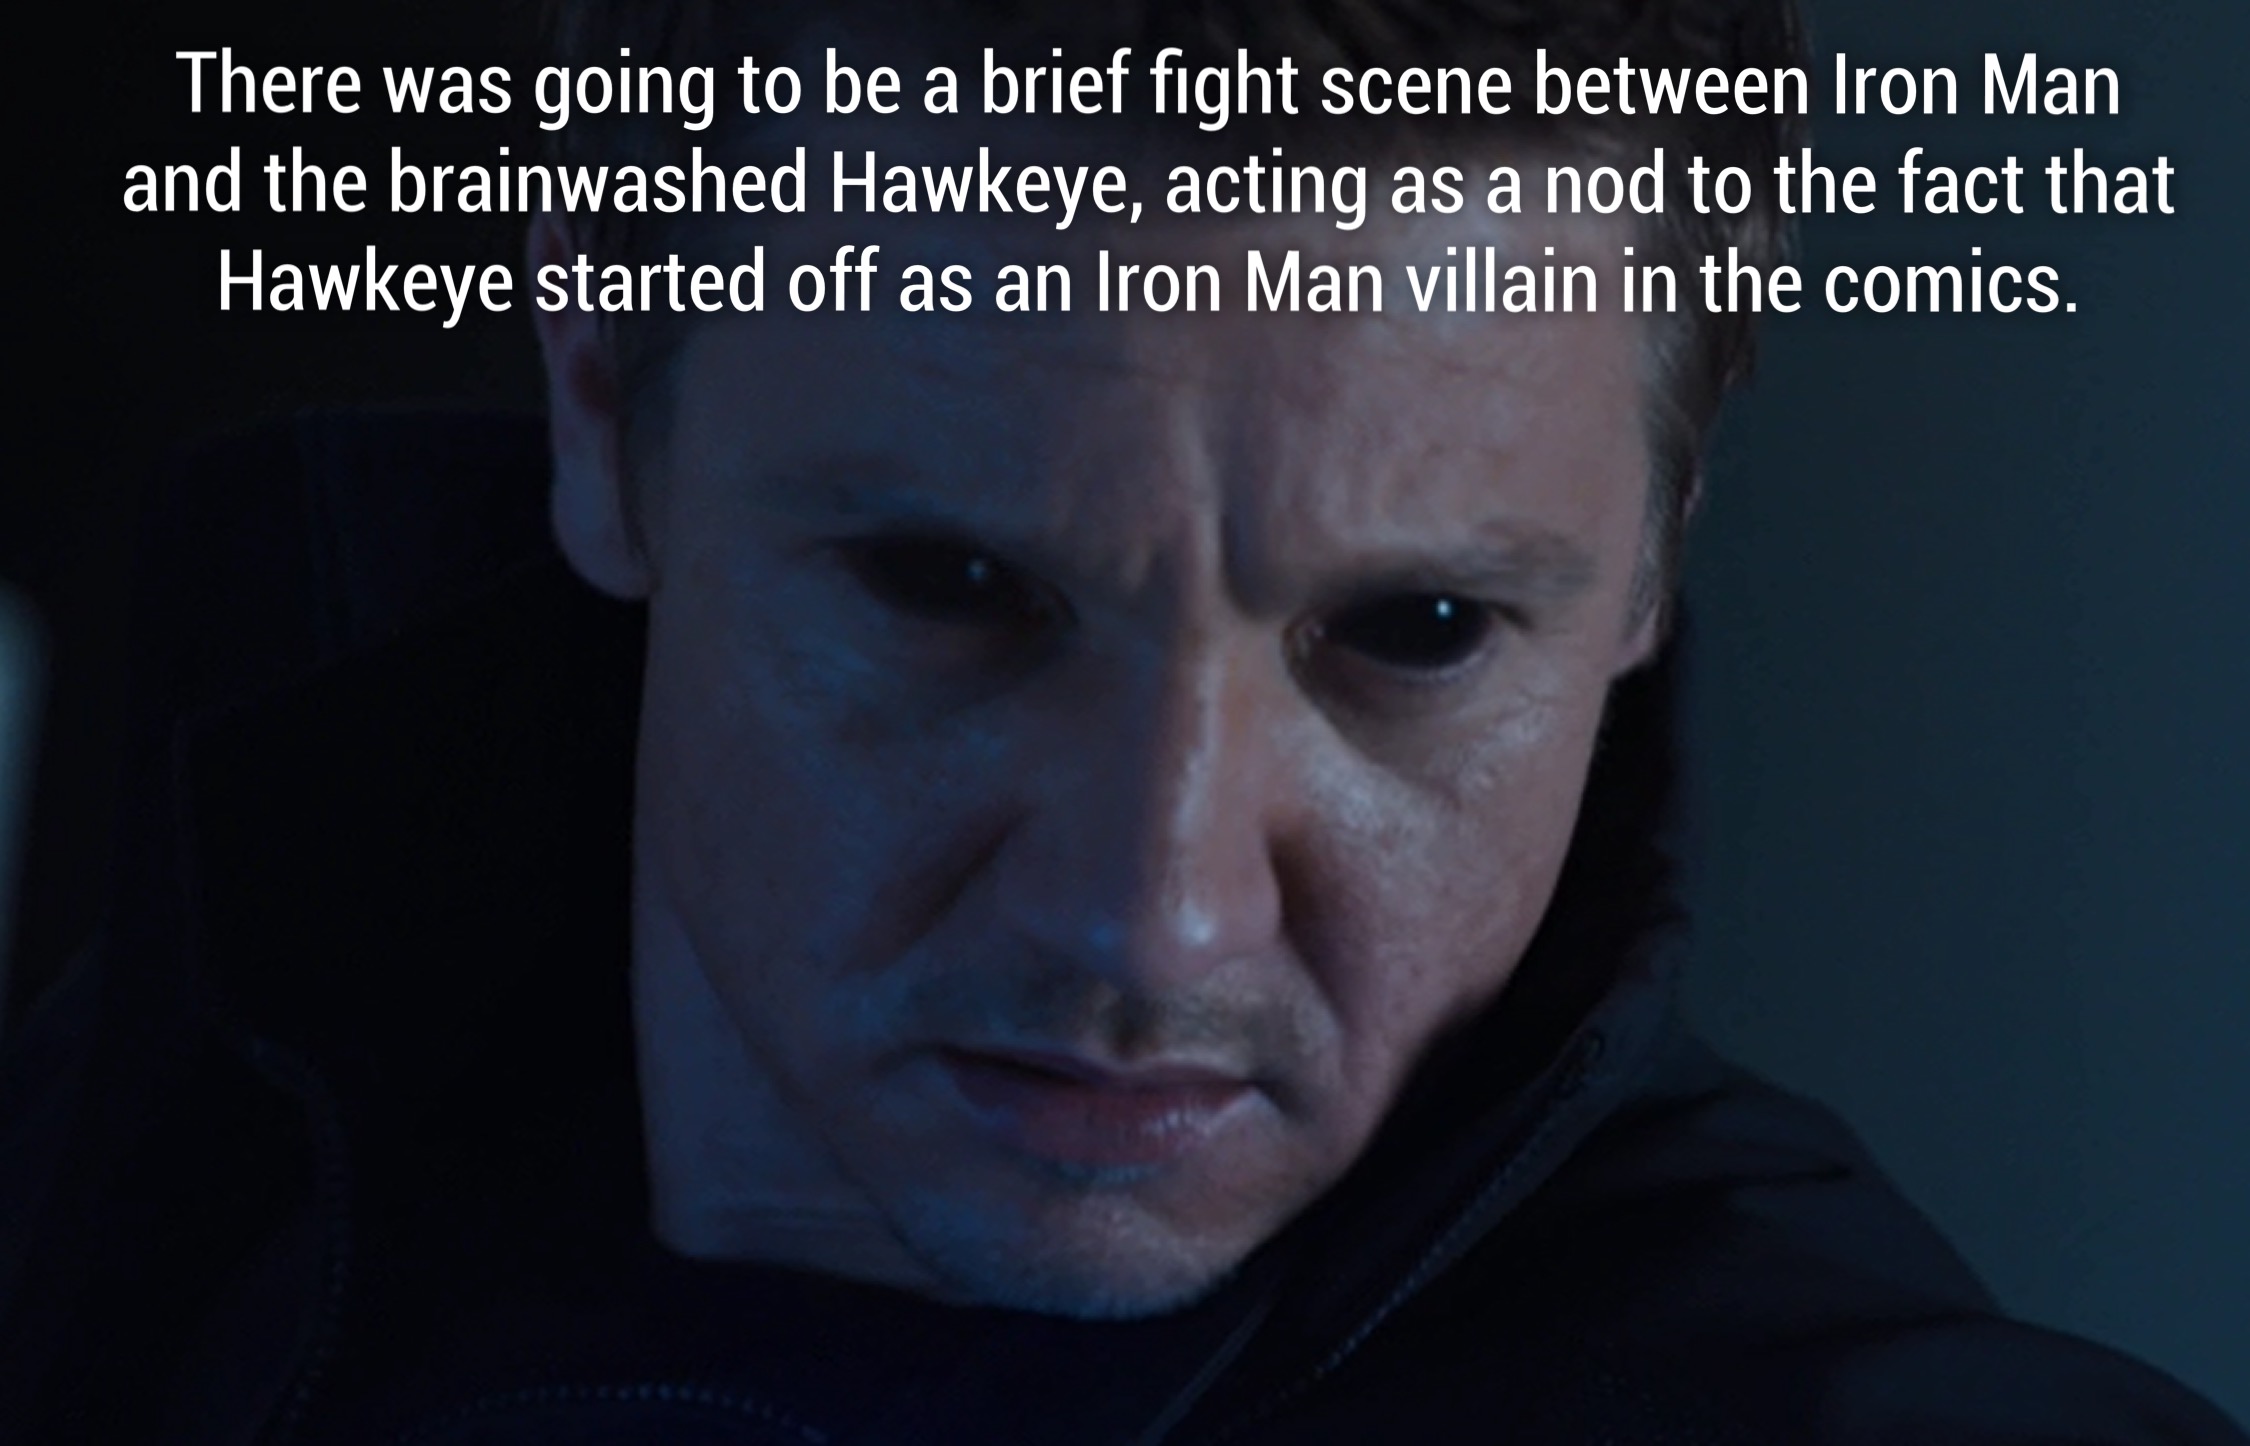 hawkeye facts - There was going to be a brief fight scene between Iron Man and the brainwashed Hawkeye, acting as a nod to the fact that Hawkeye started off as an Iron Man villain in the comics.